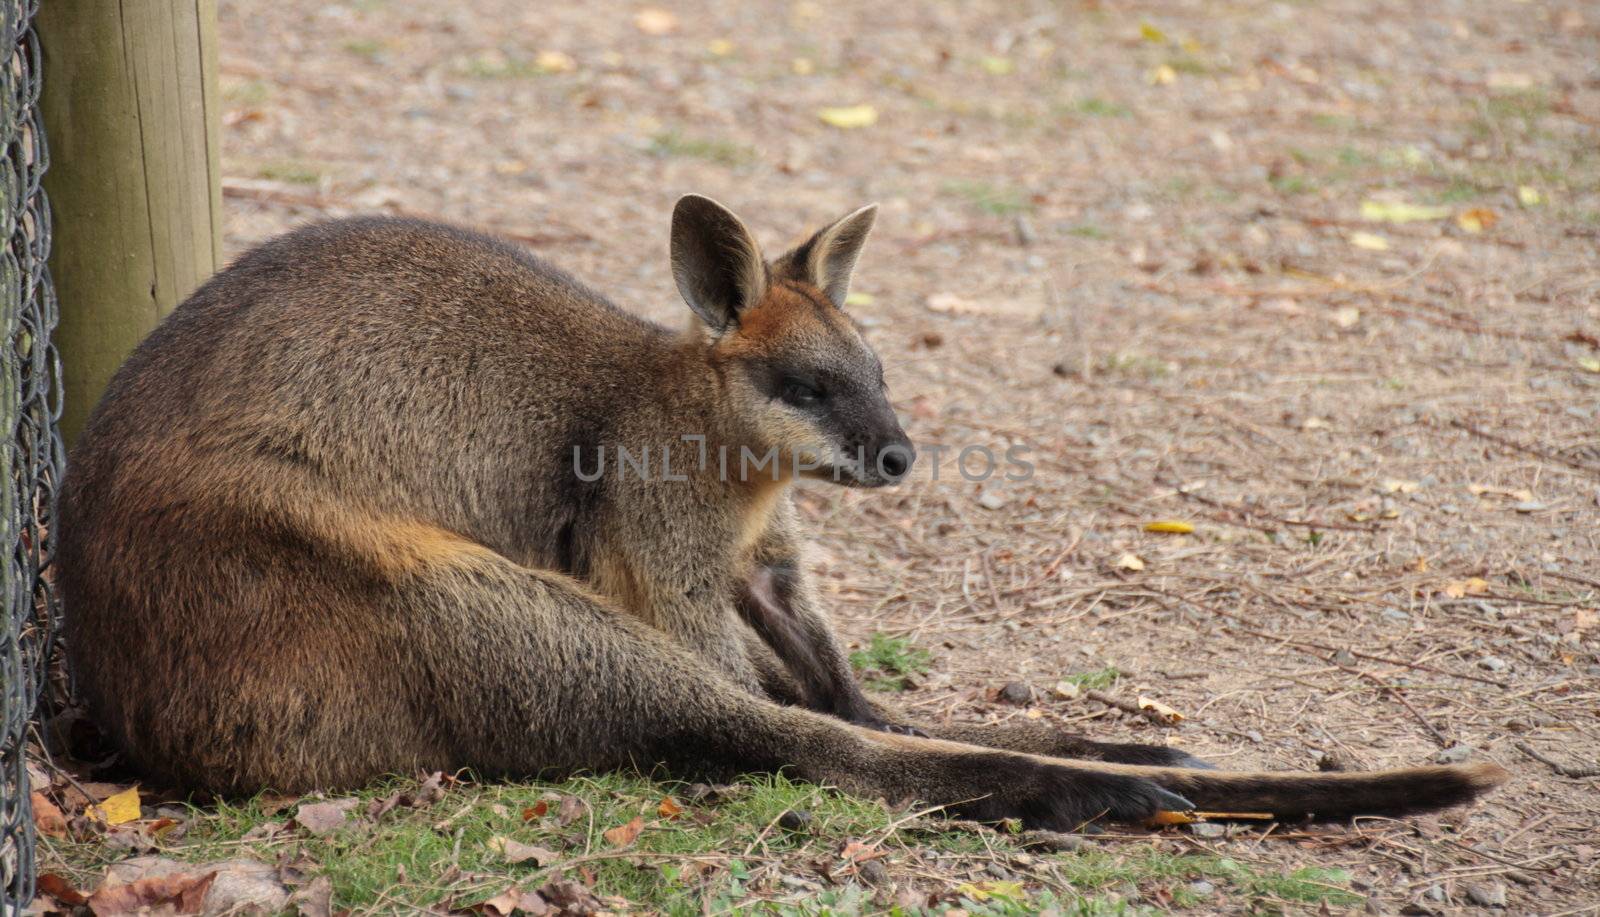 Full body side profile of a small Australian Wallaby sitting on the ground